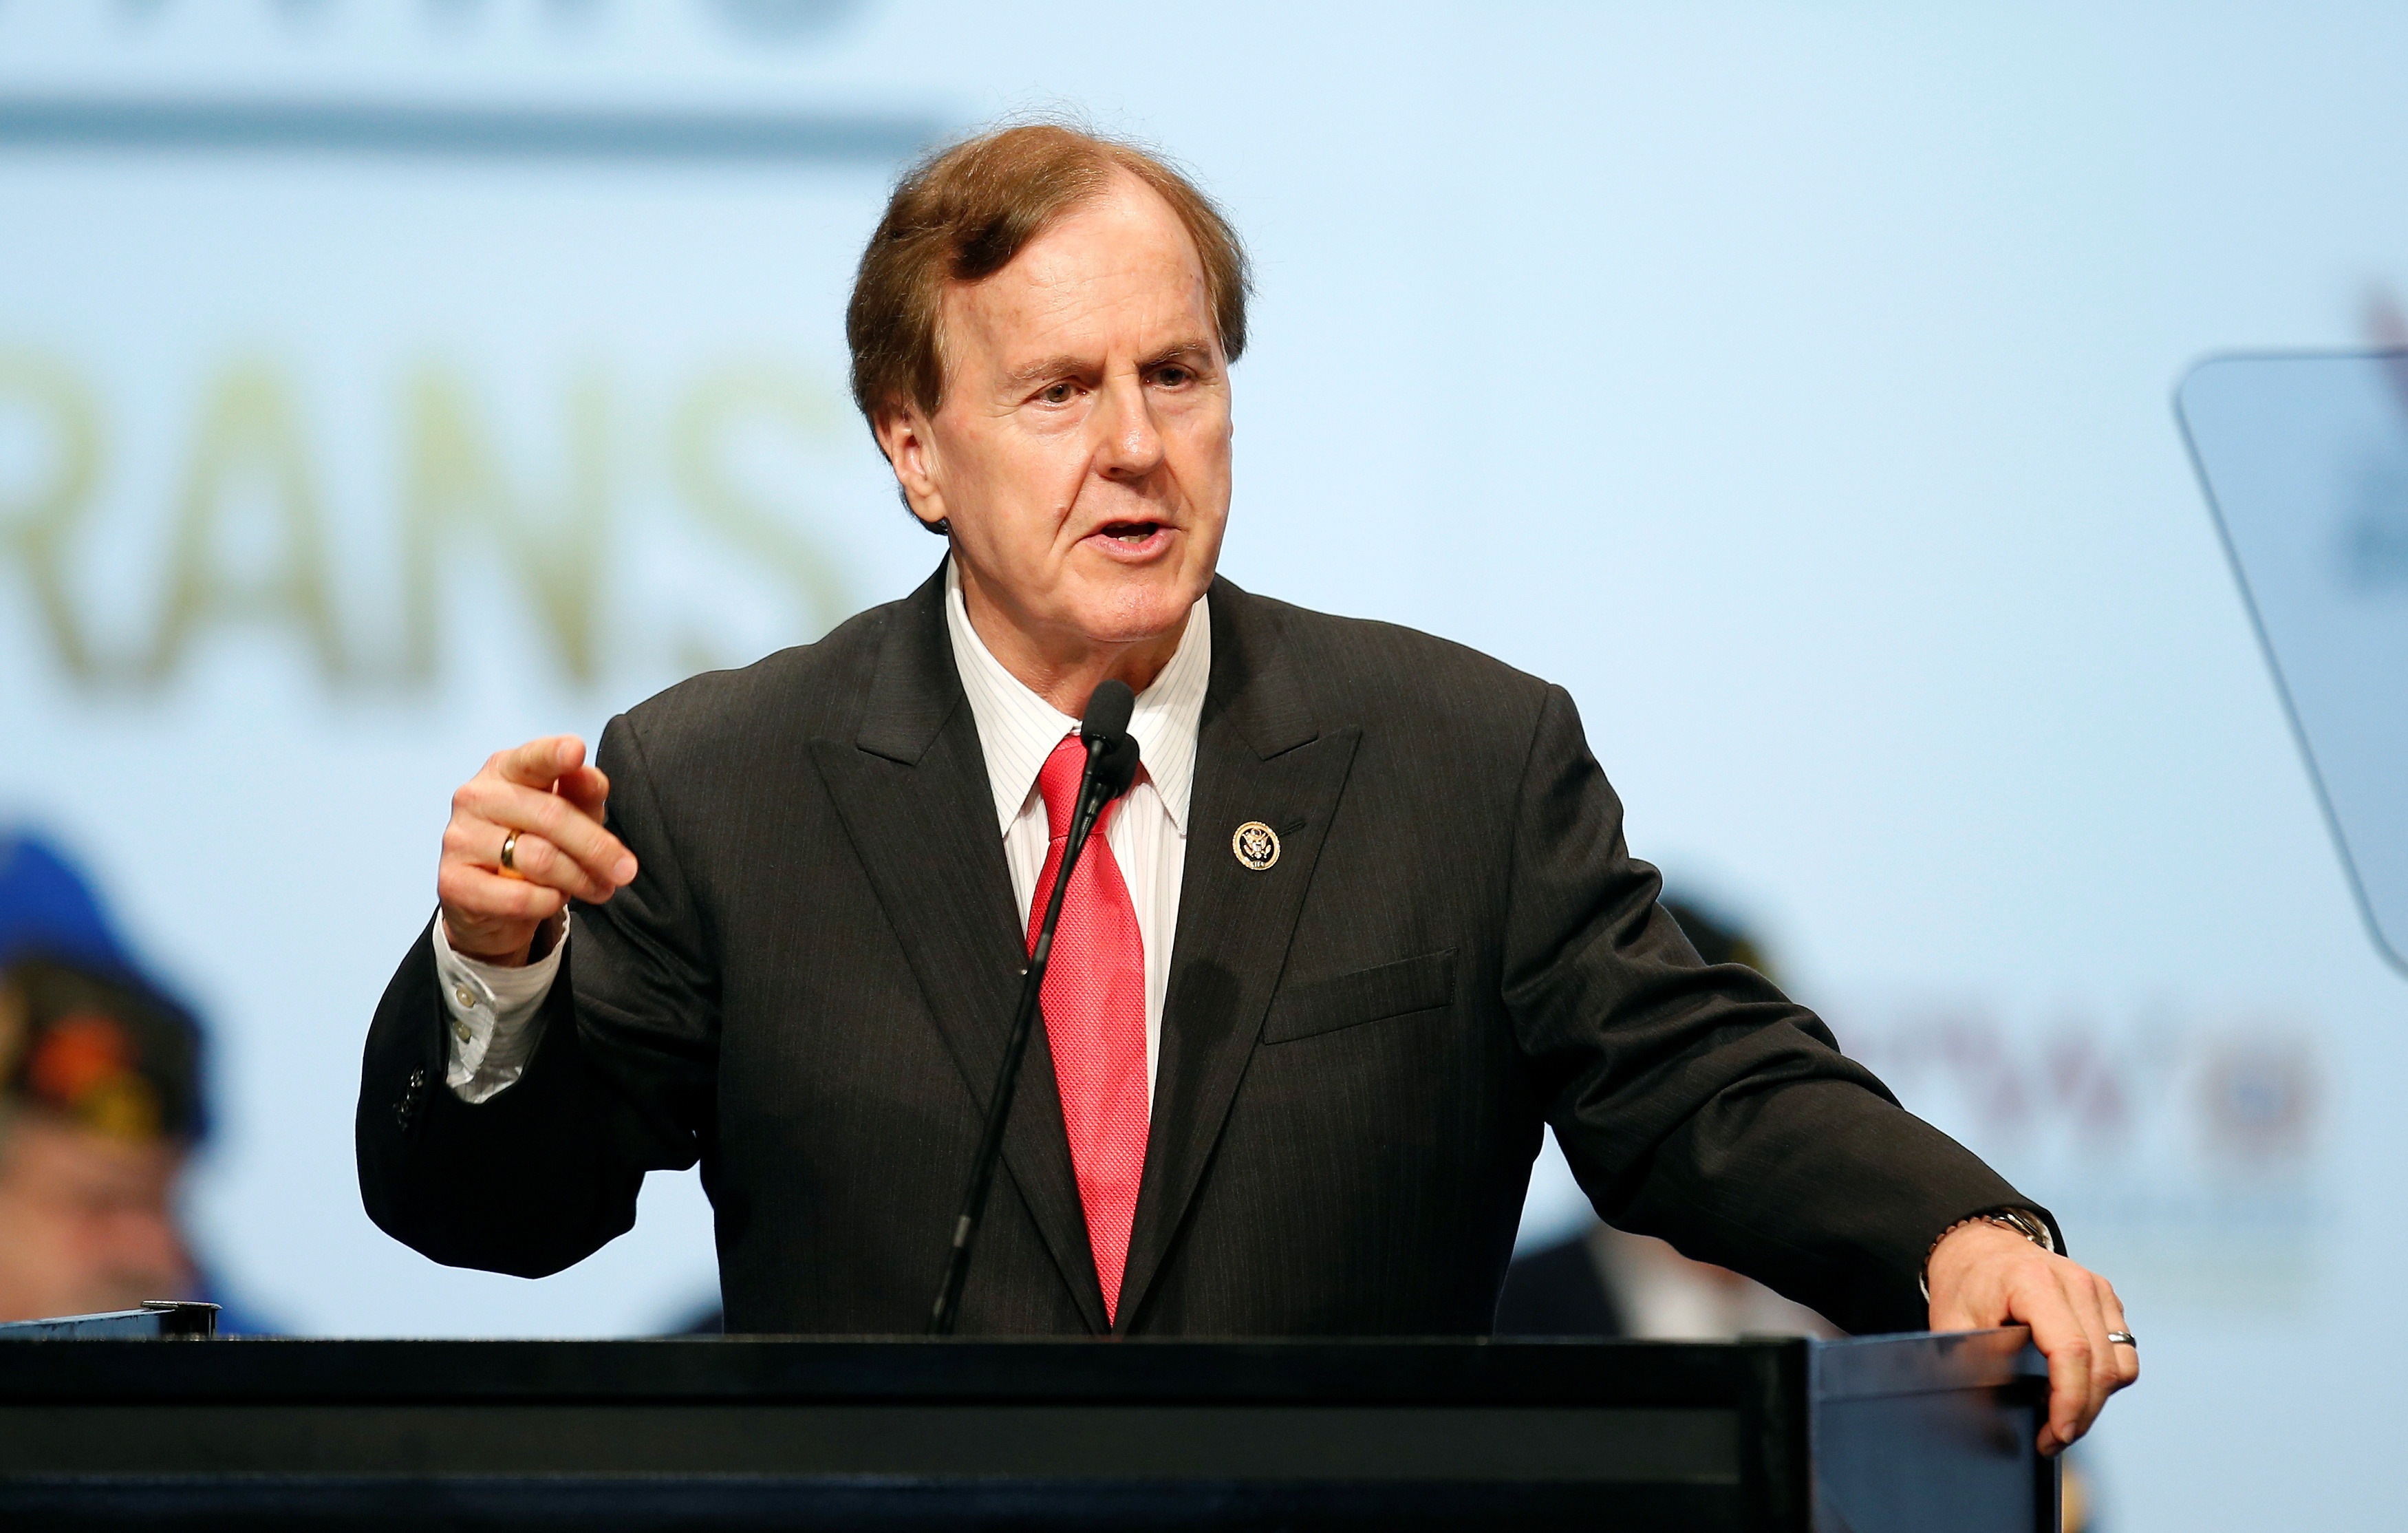 U.S. Representative Robert Pittenger speaks at the Veterans of Foreign Wars Convention in Charlotte, North Carolina July 26, 2016. REUTERS/Chris Keane 